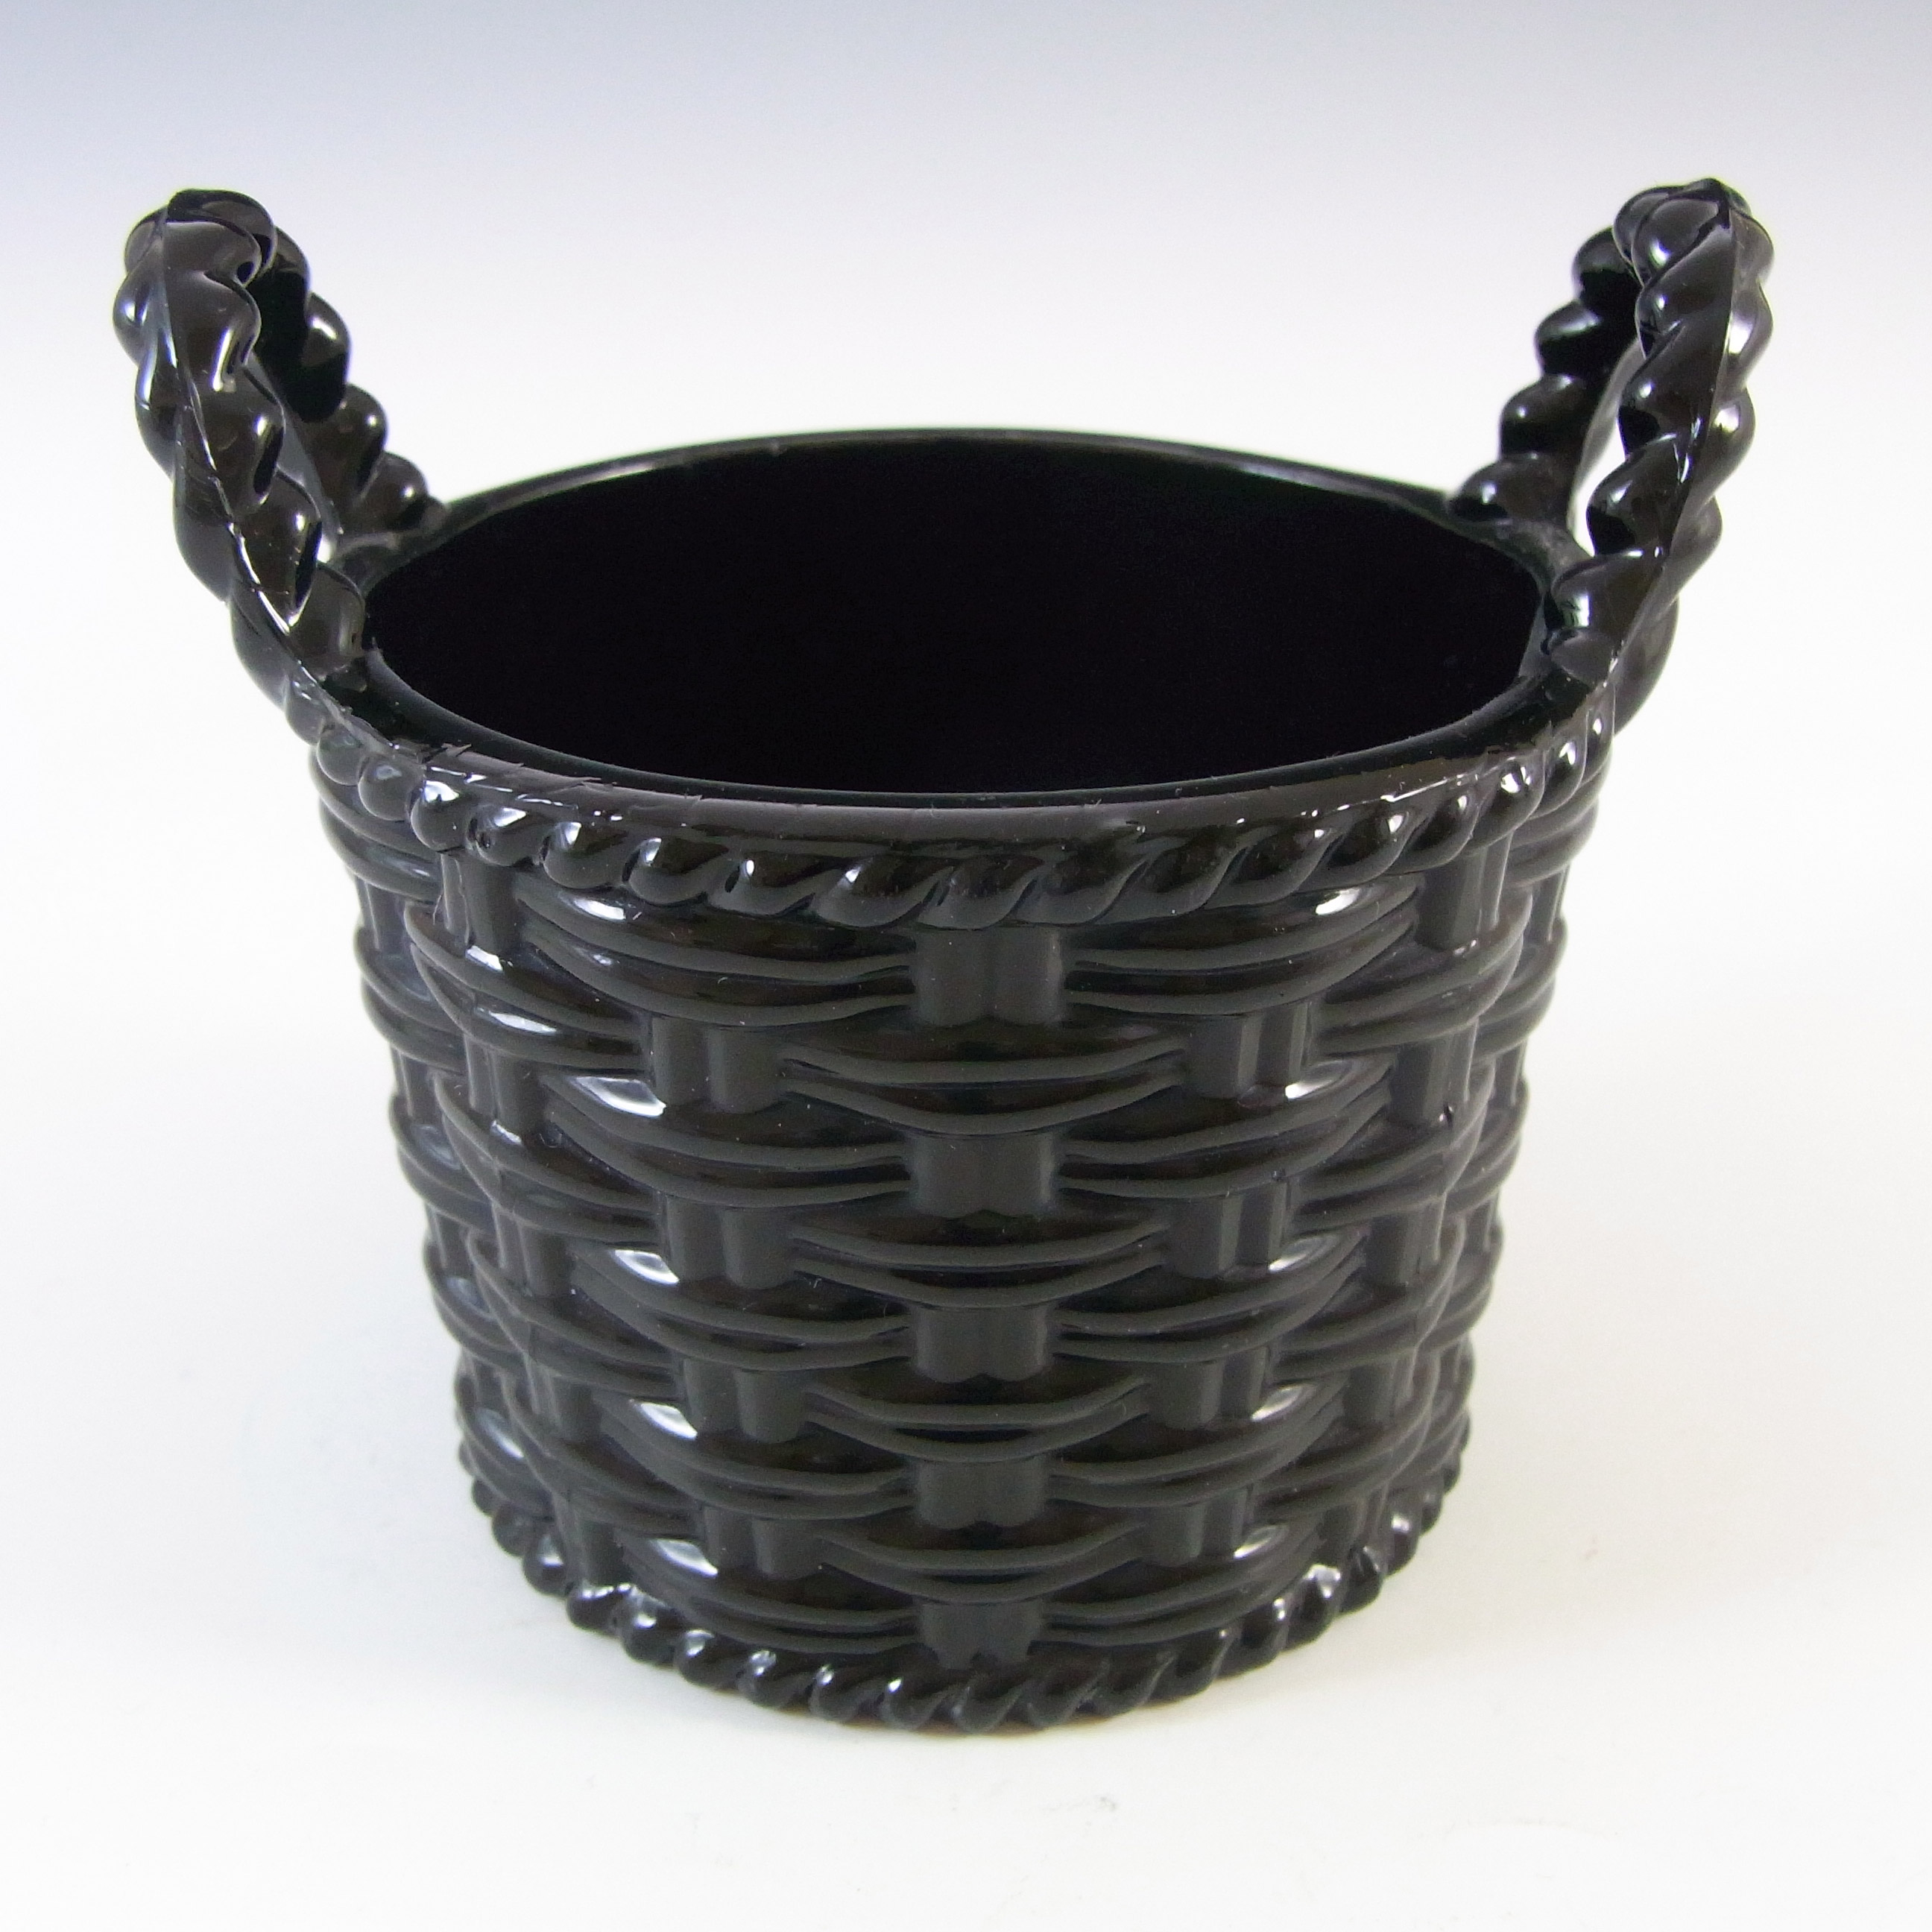 Sowerby #1102 Victorian Black Milk Glass Basket Bowl - Marked - Click Image to Close